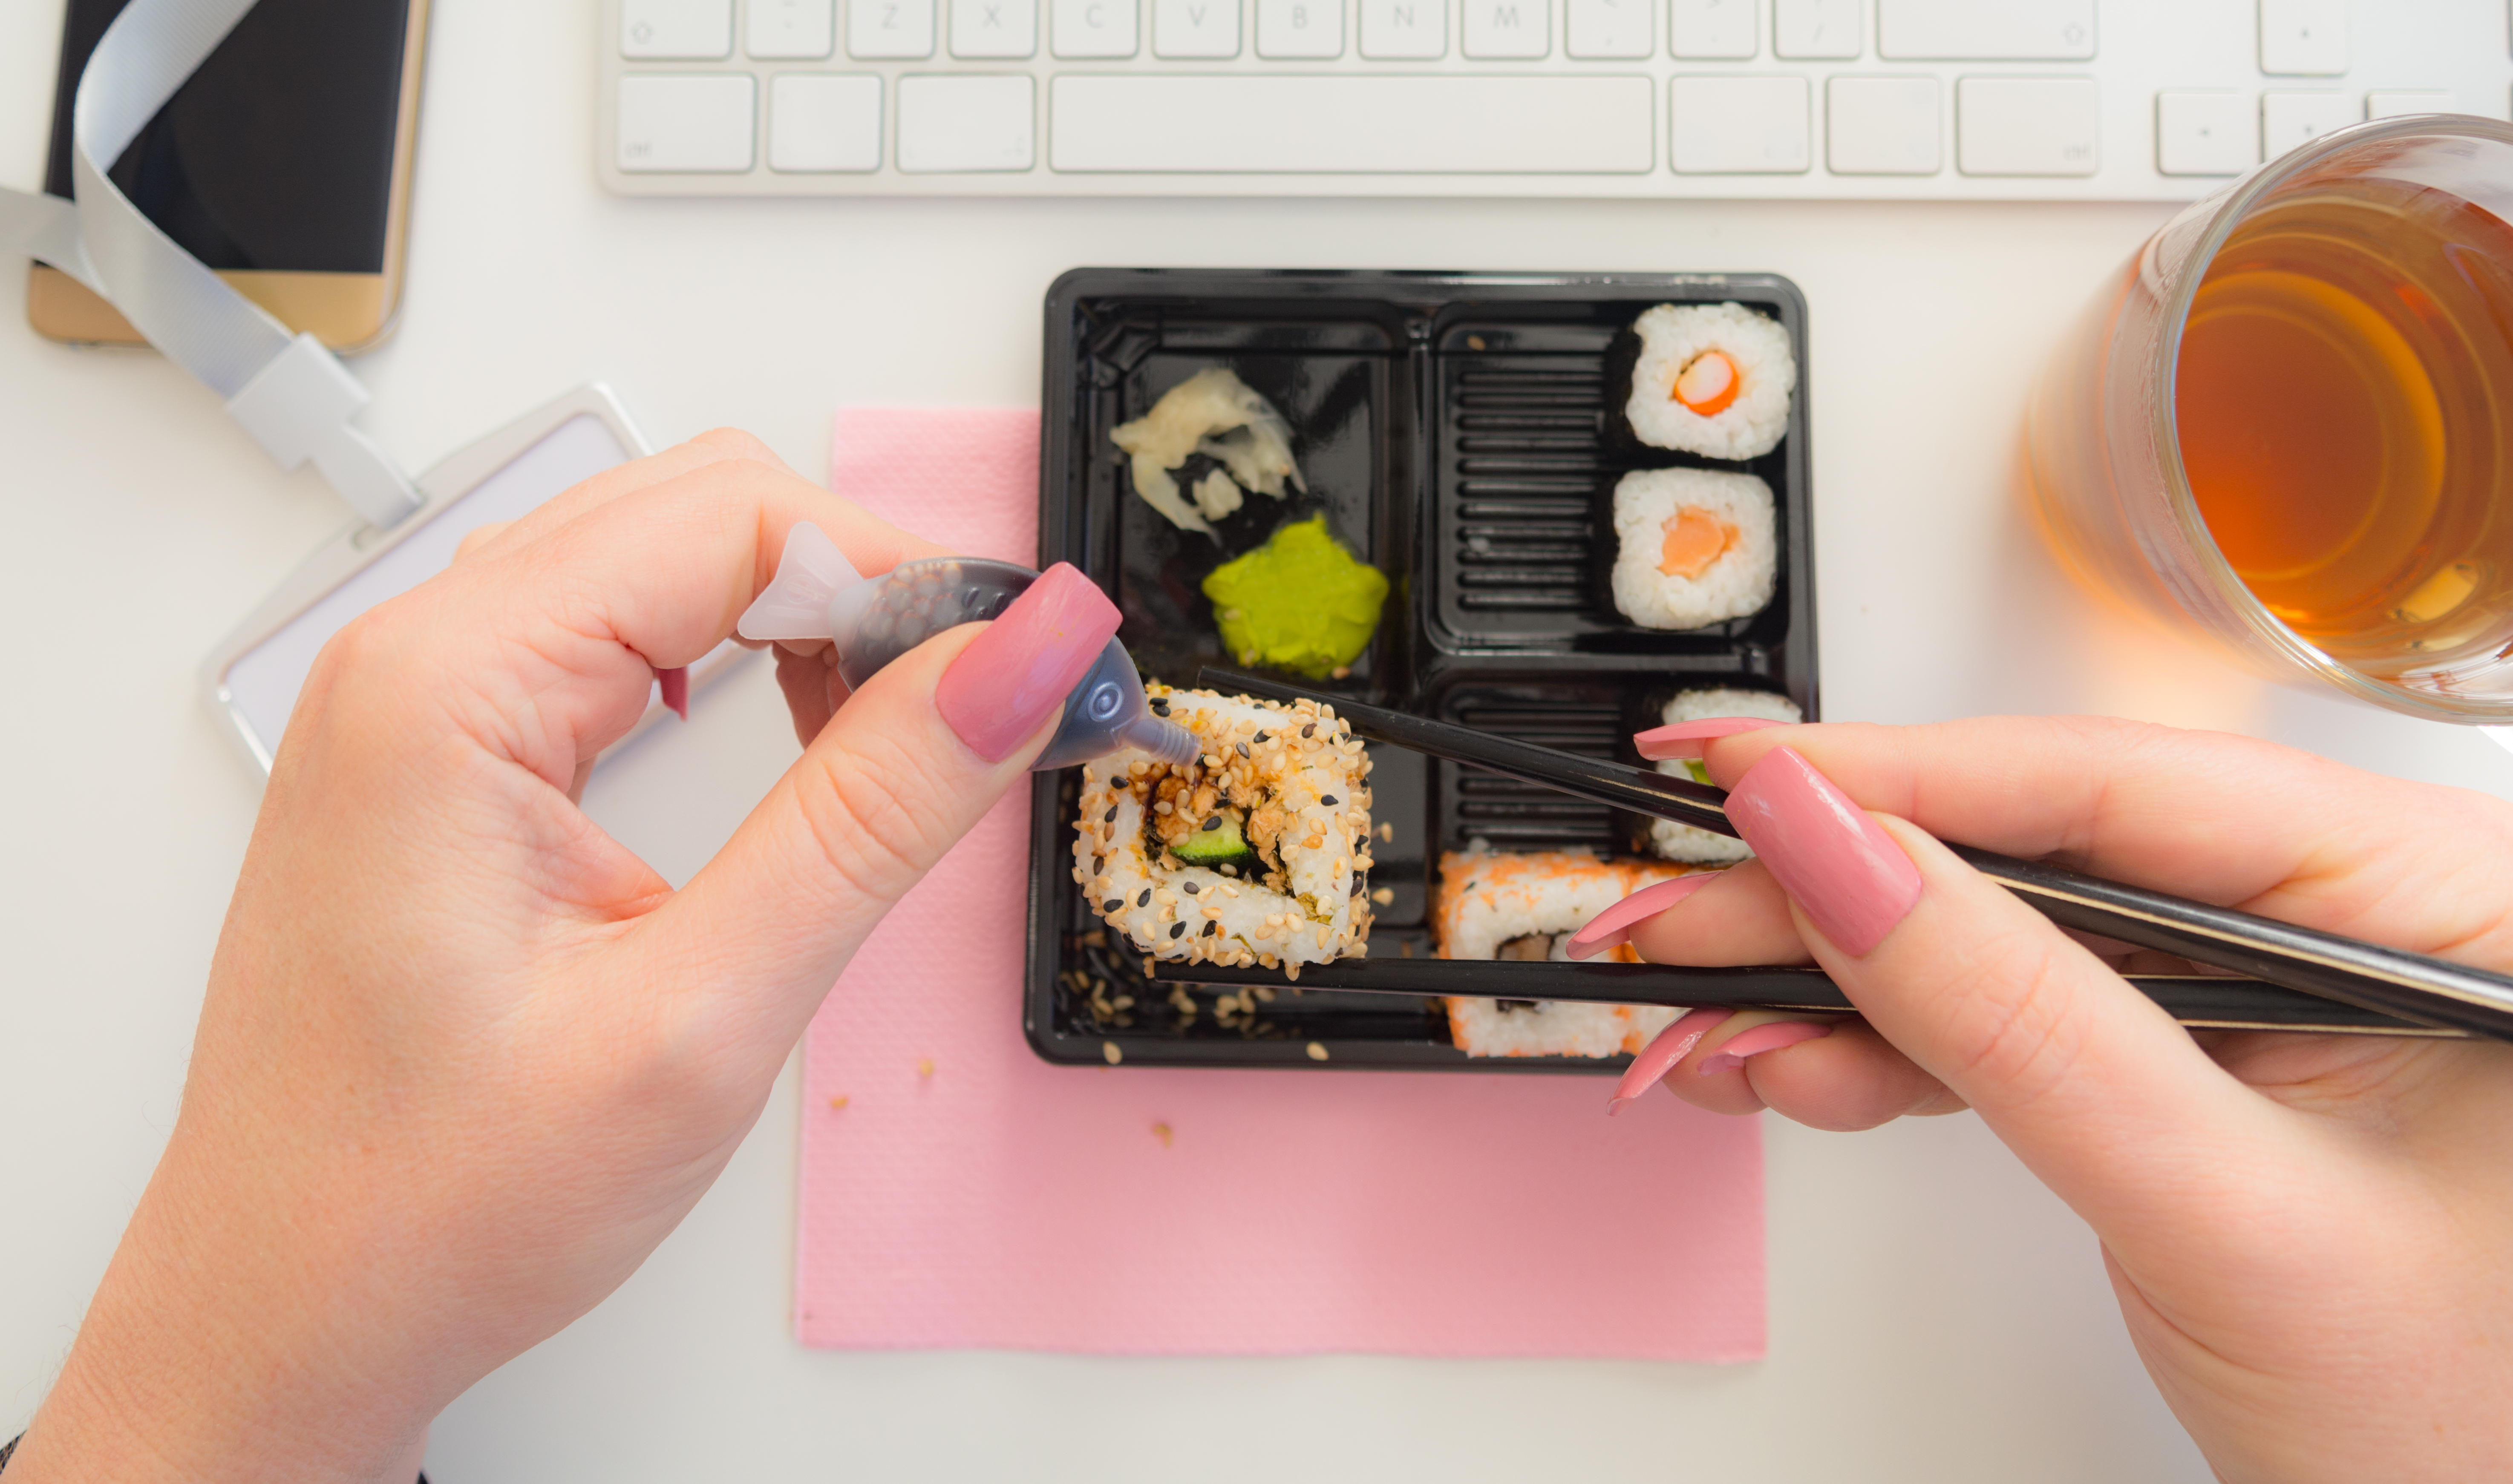 Personal perspective having Sushi during lunch at work